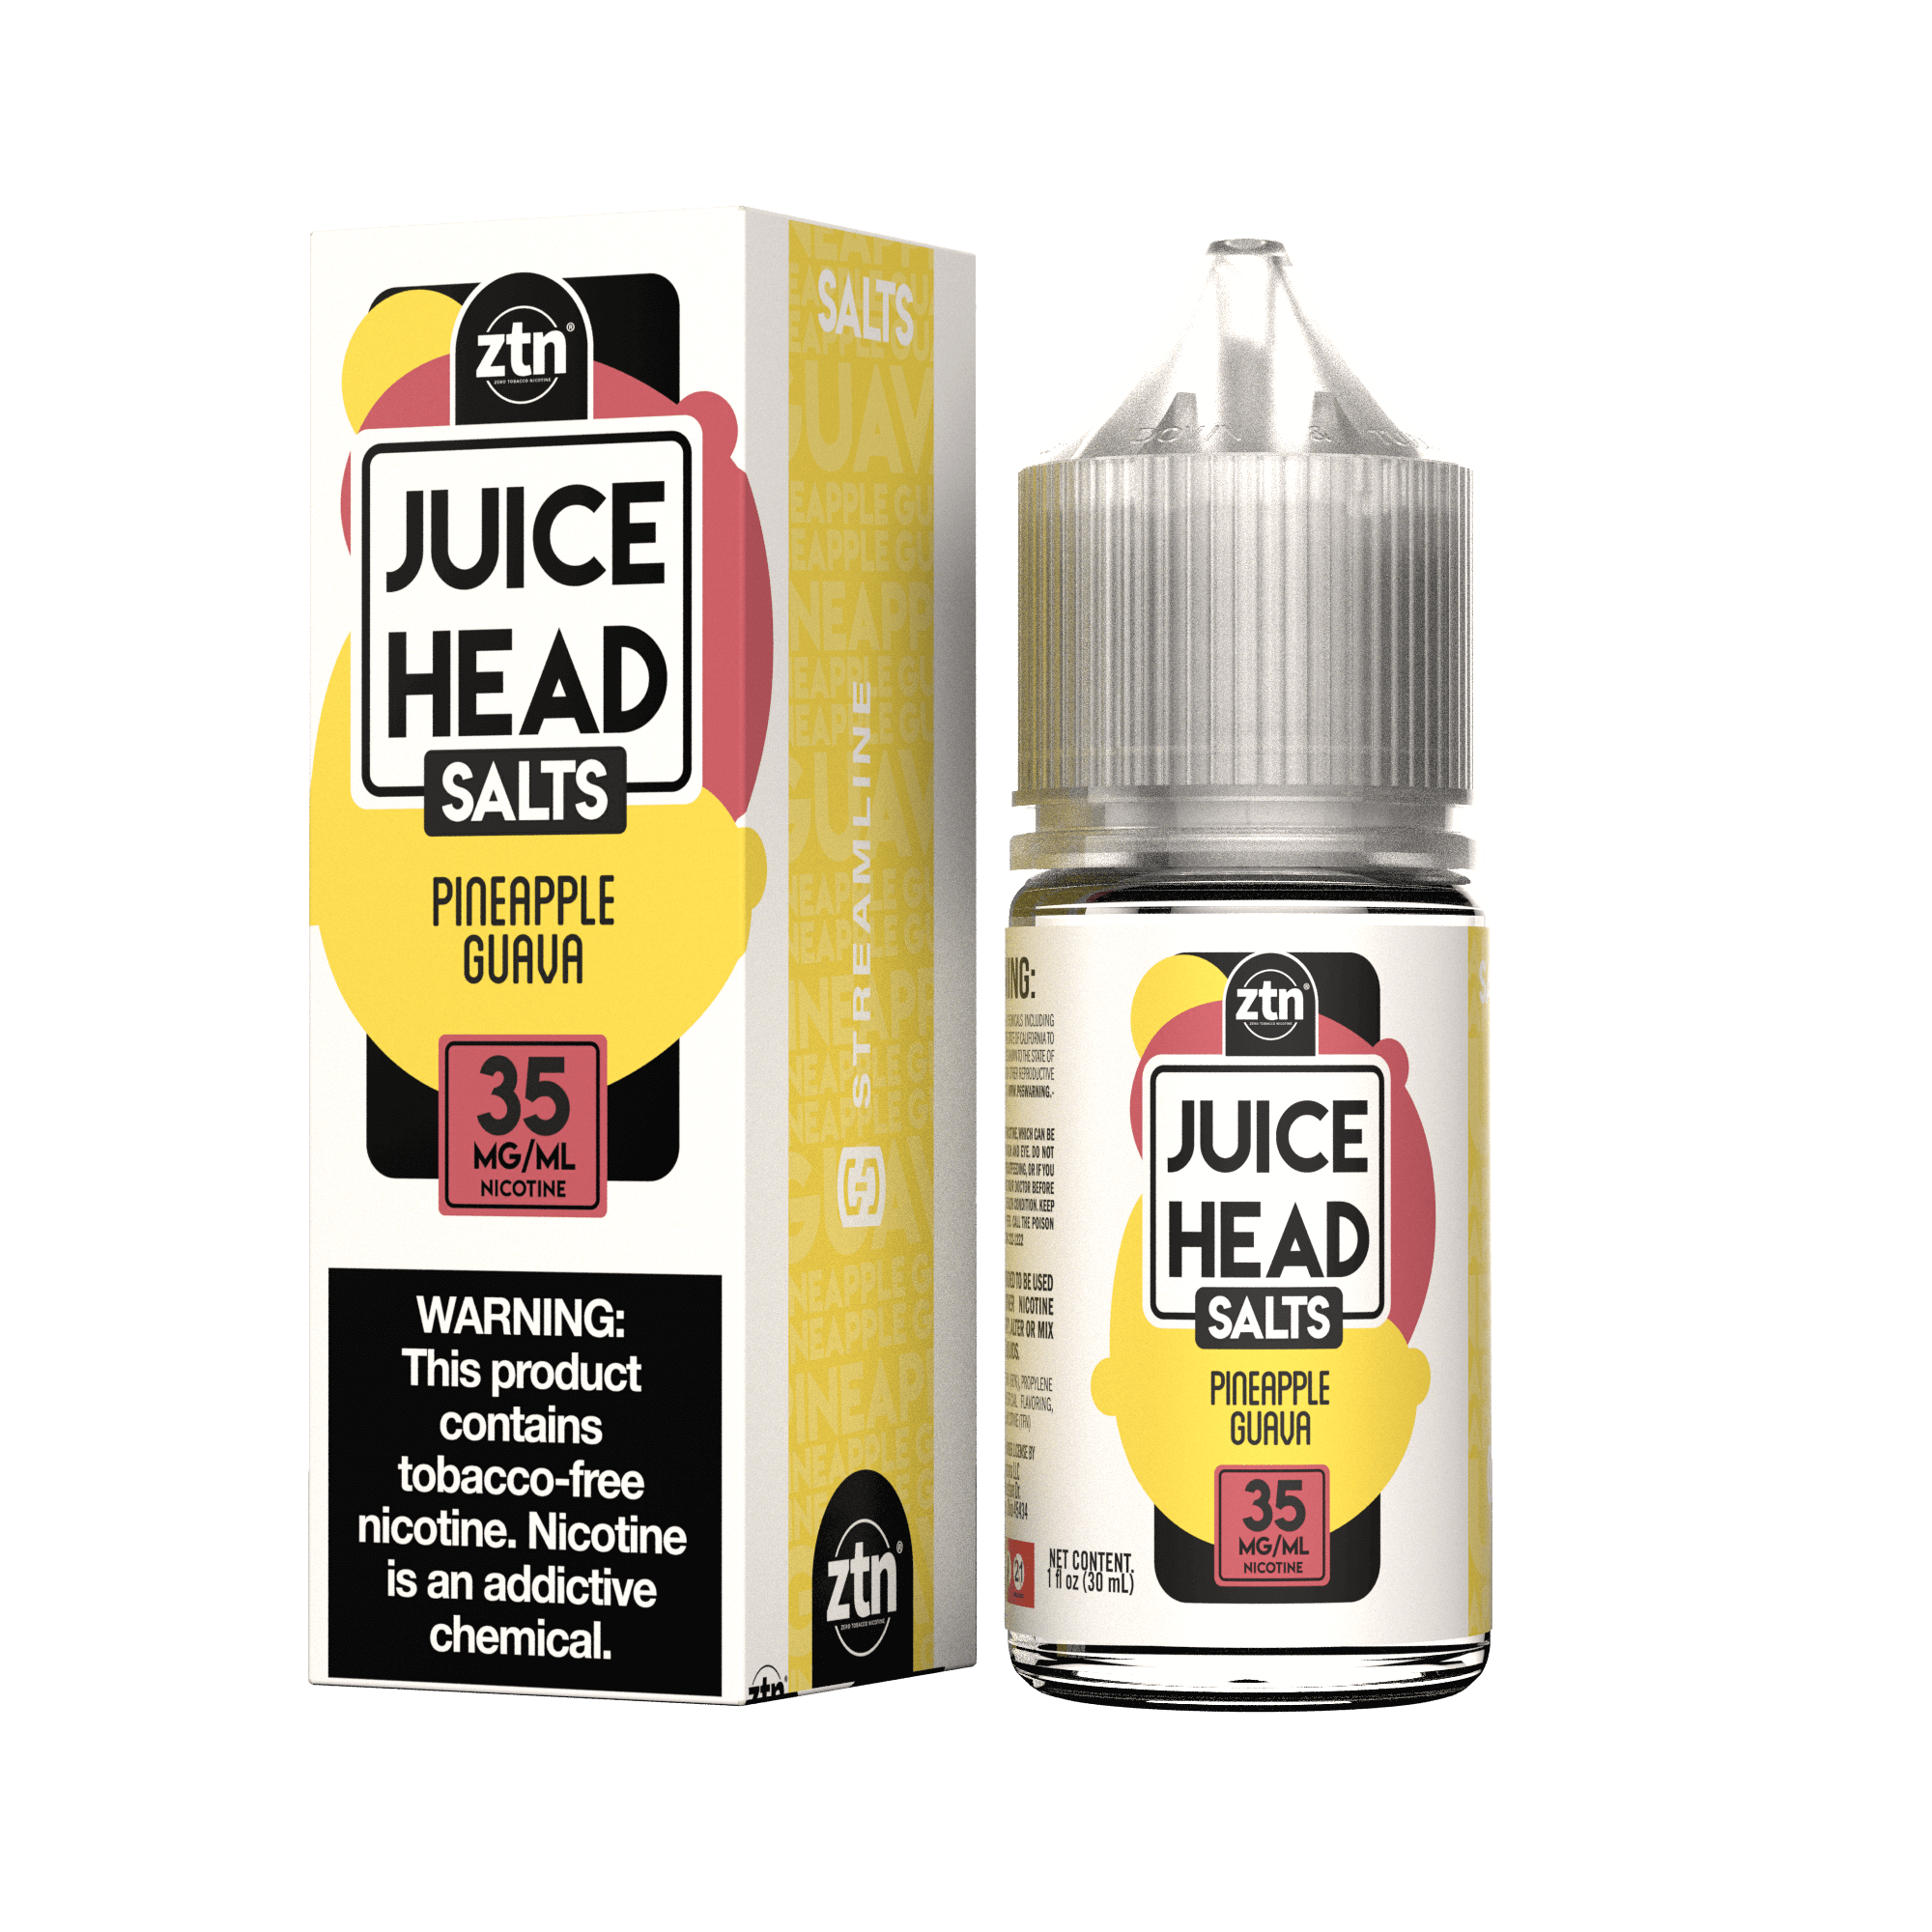 Pineapple Guava by Juice Head Salts Series 30mL with Packaging